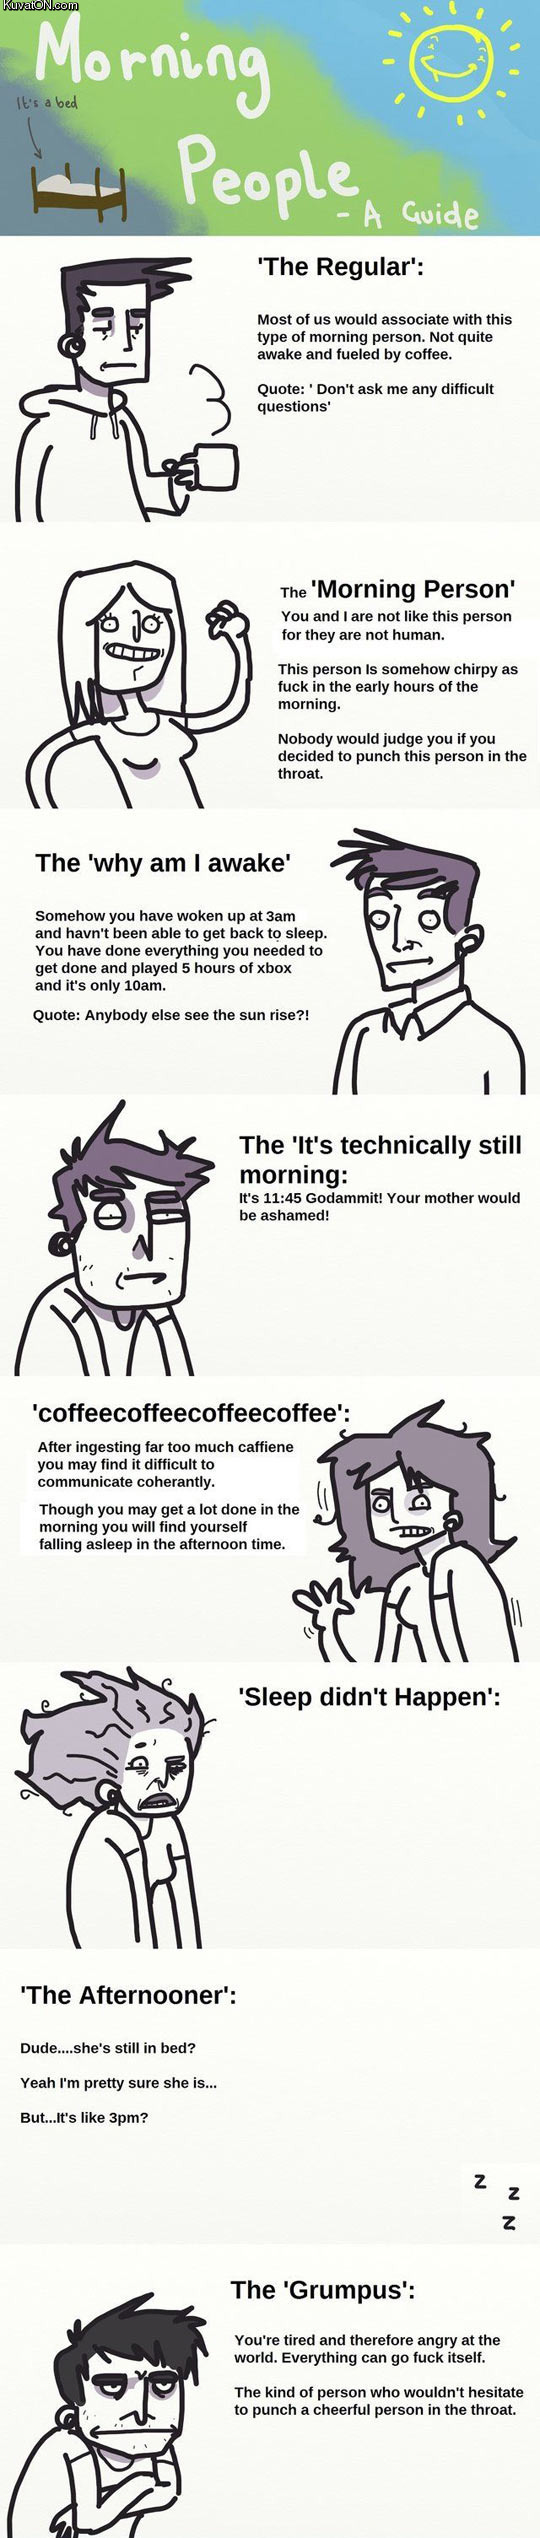 the_many_types_of_morning_people.jpg